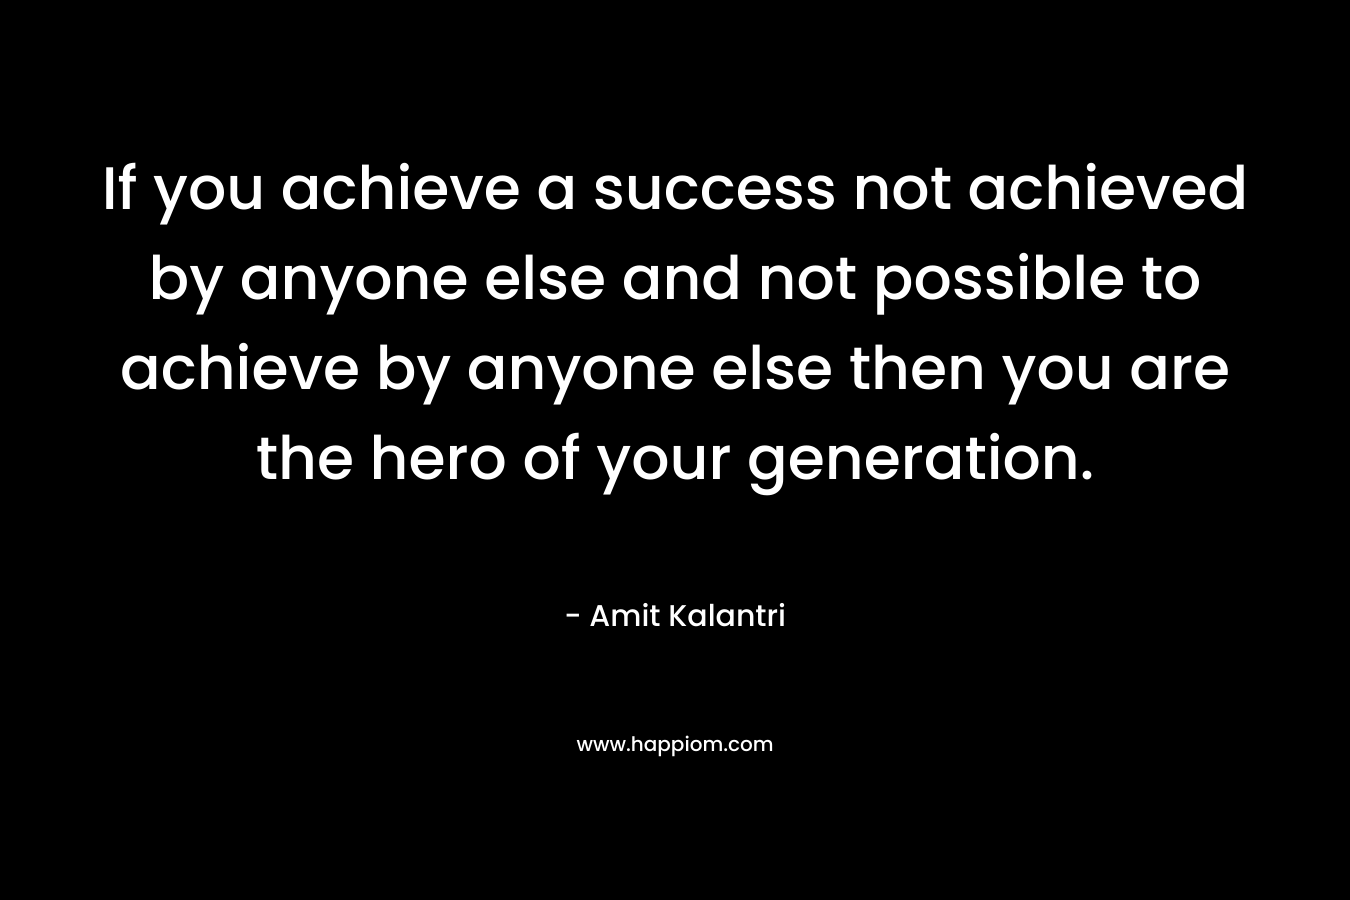 If you achieve a success not achieved by anyone else and not possible to achieve by anyone else then you are the hero of your generation.